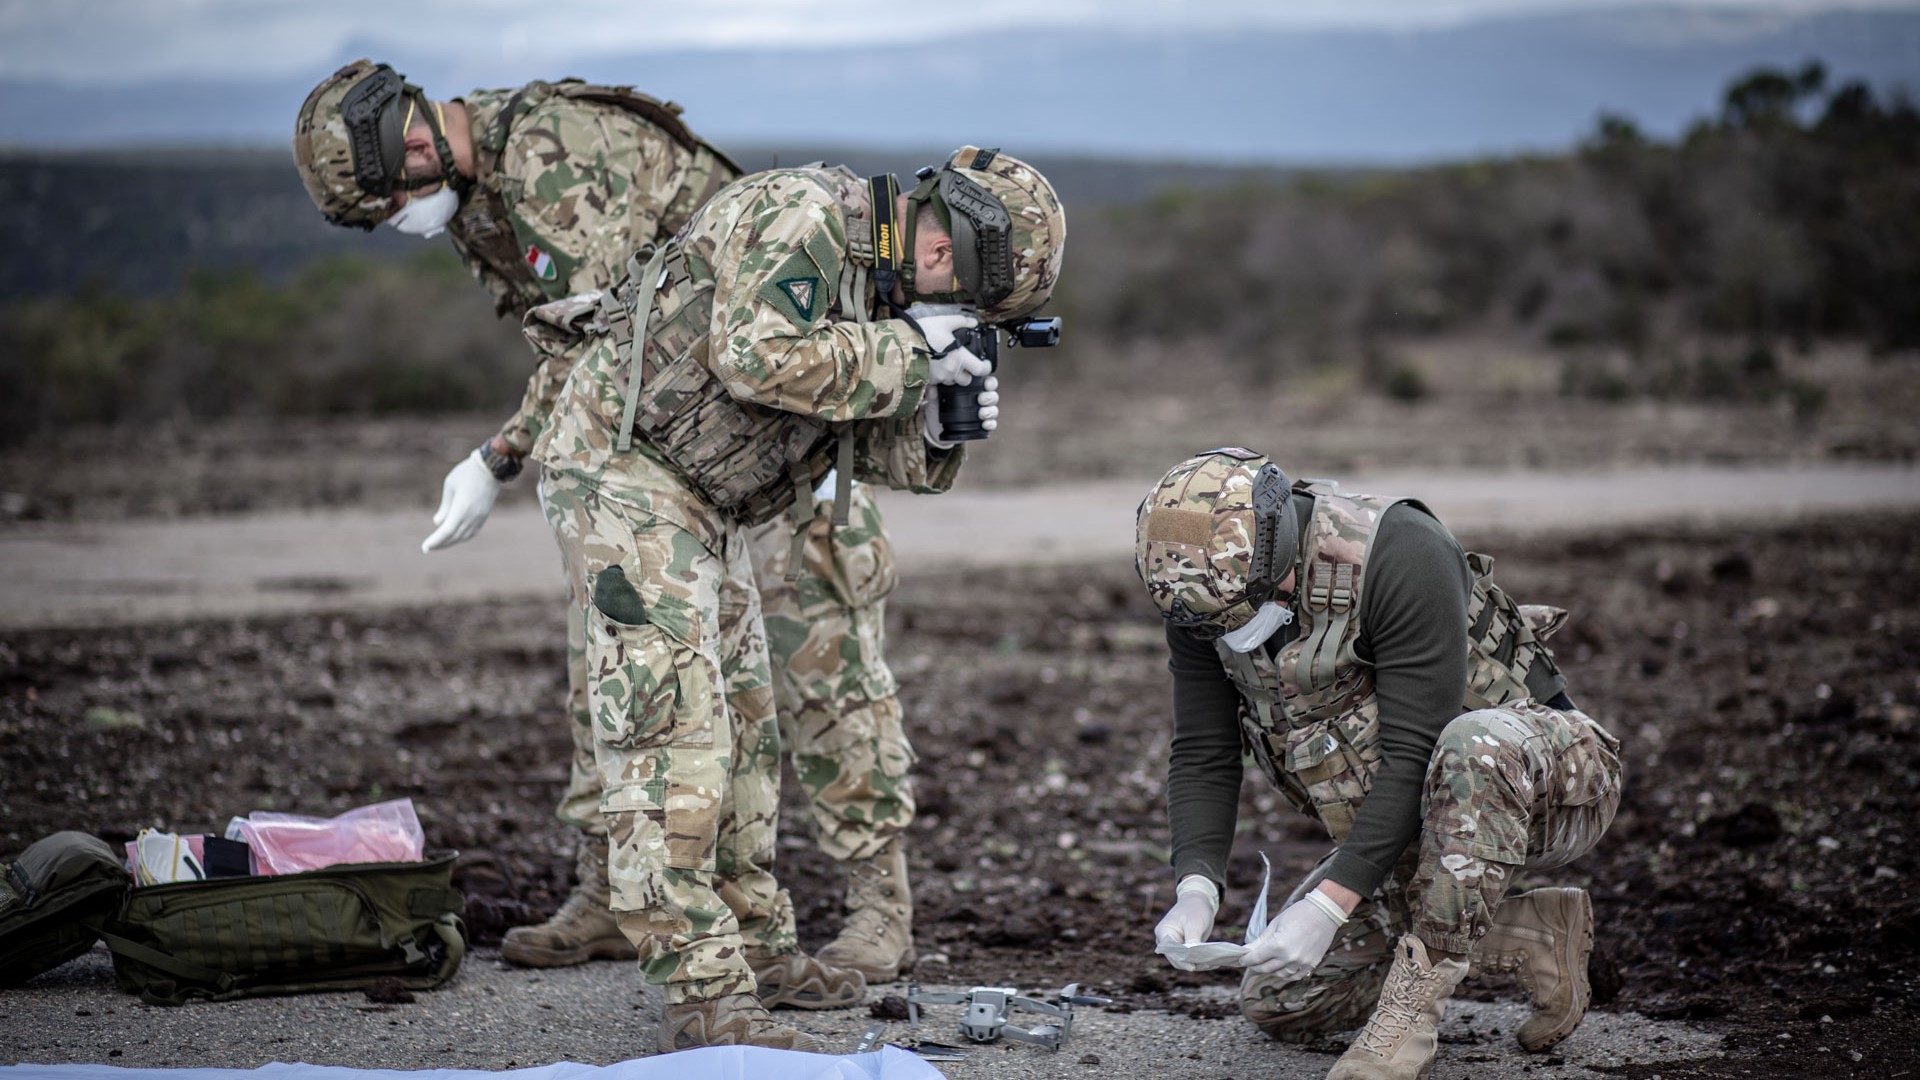 BISON COUNTER C-IED Exercises Capability Building project kicks off 